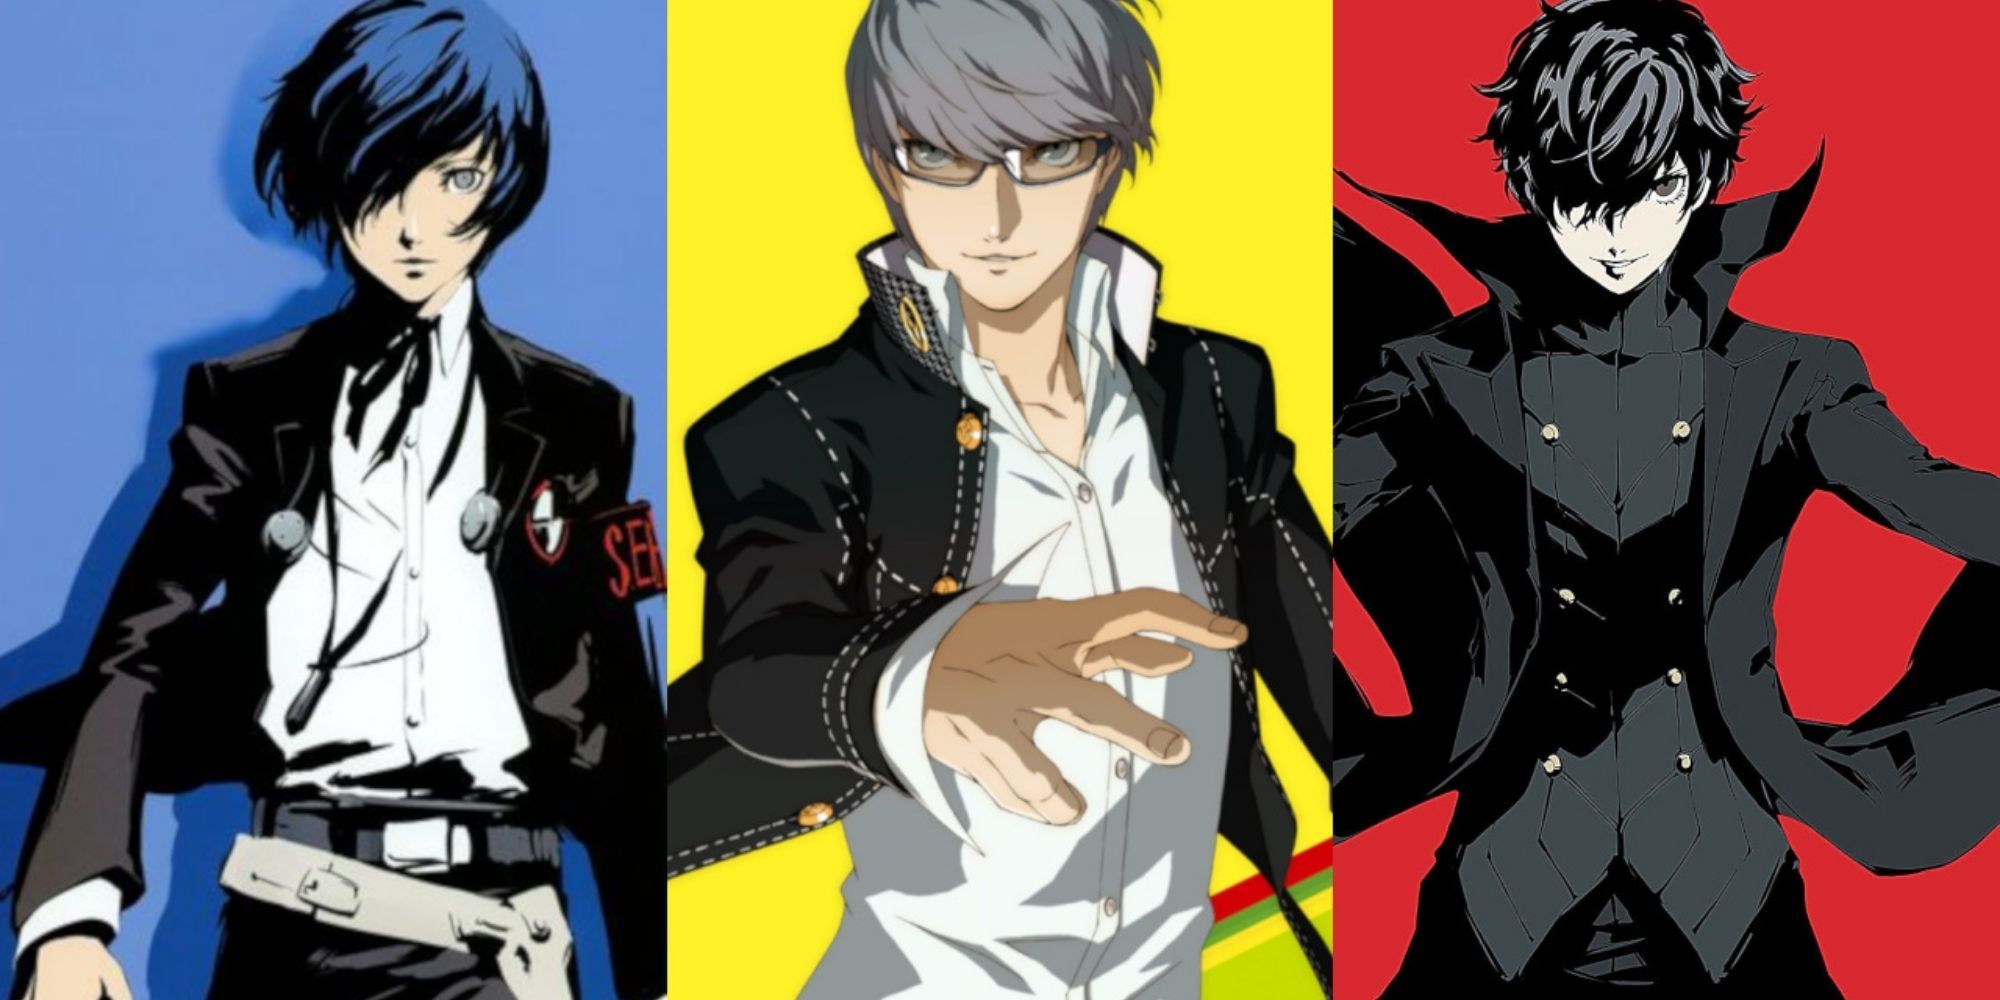 Split image of characters from the Persona games.